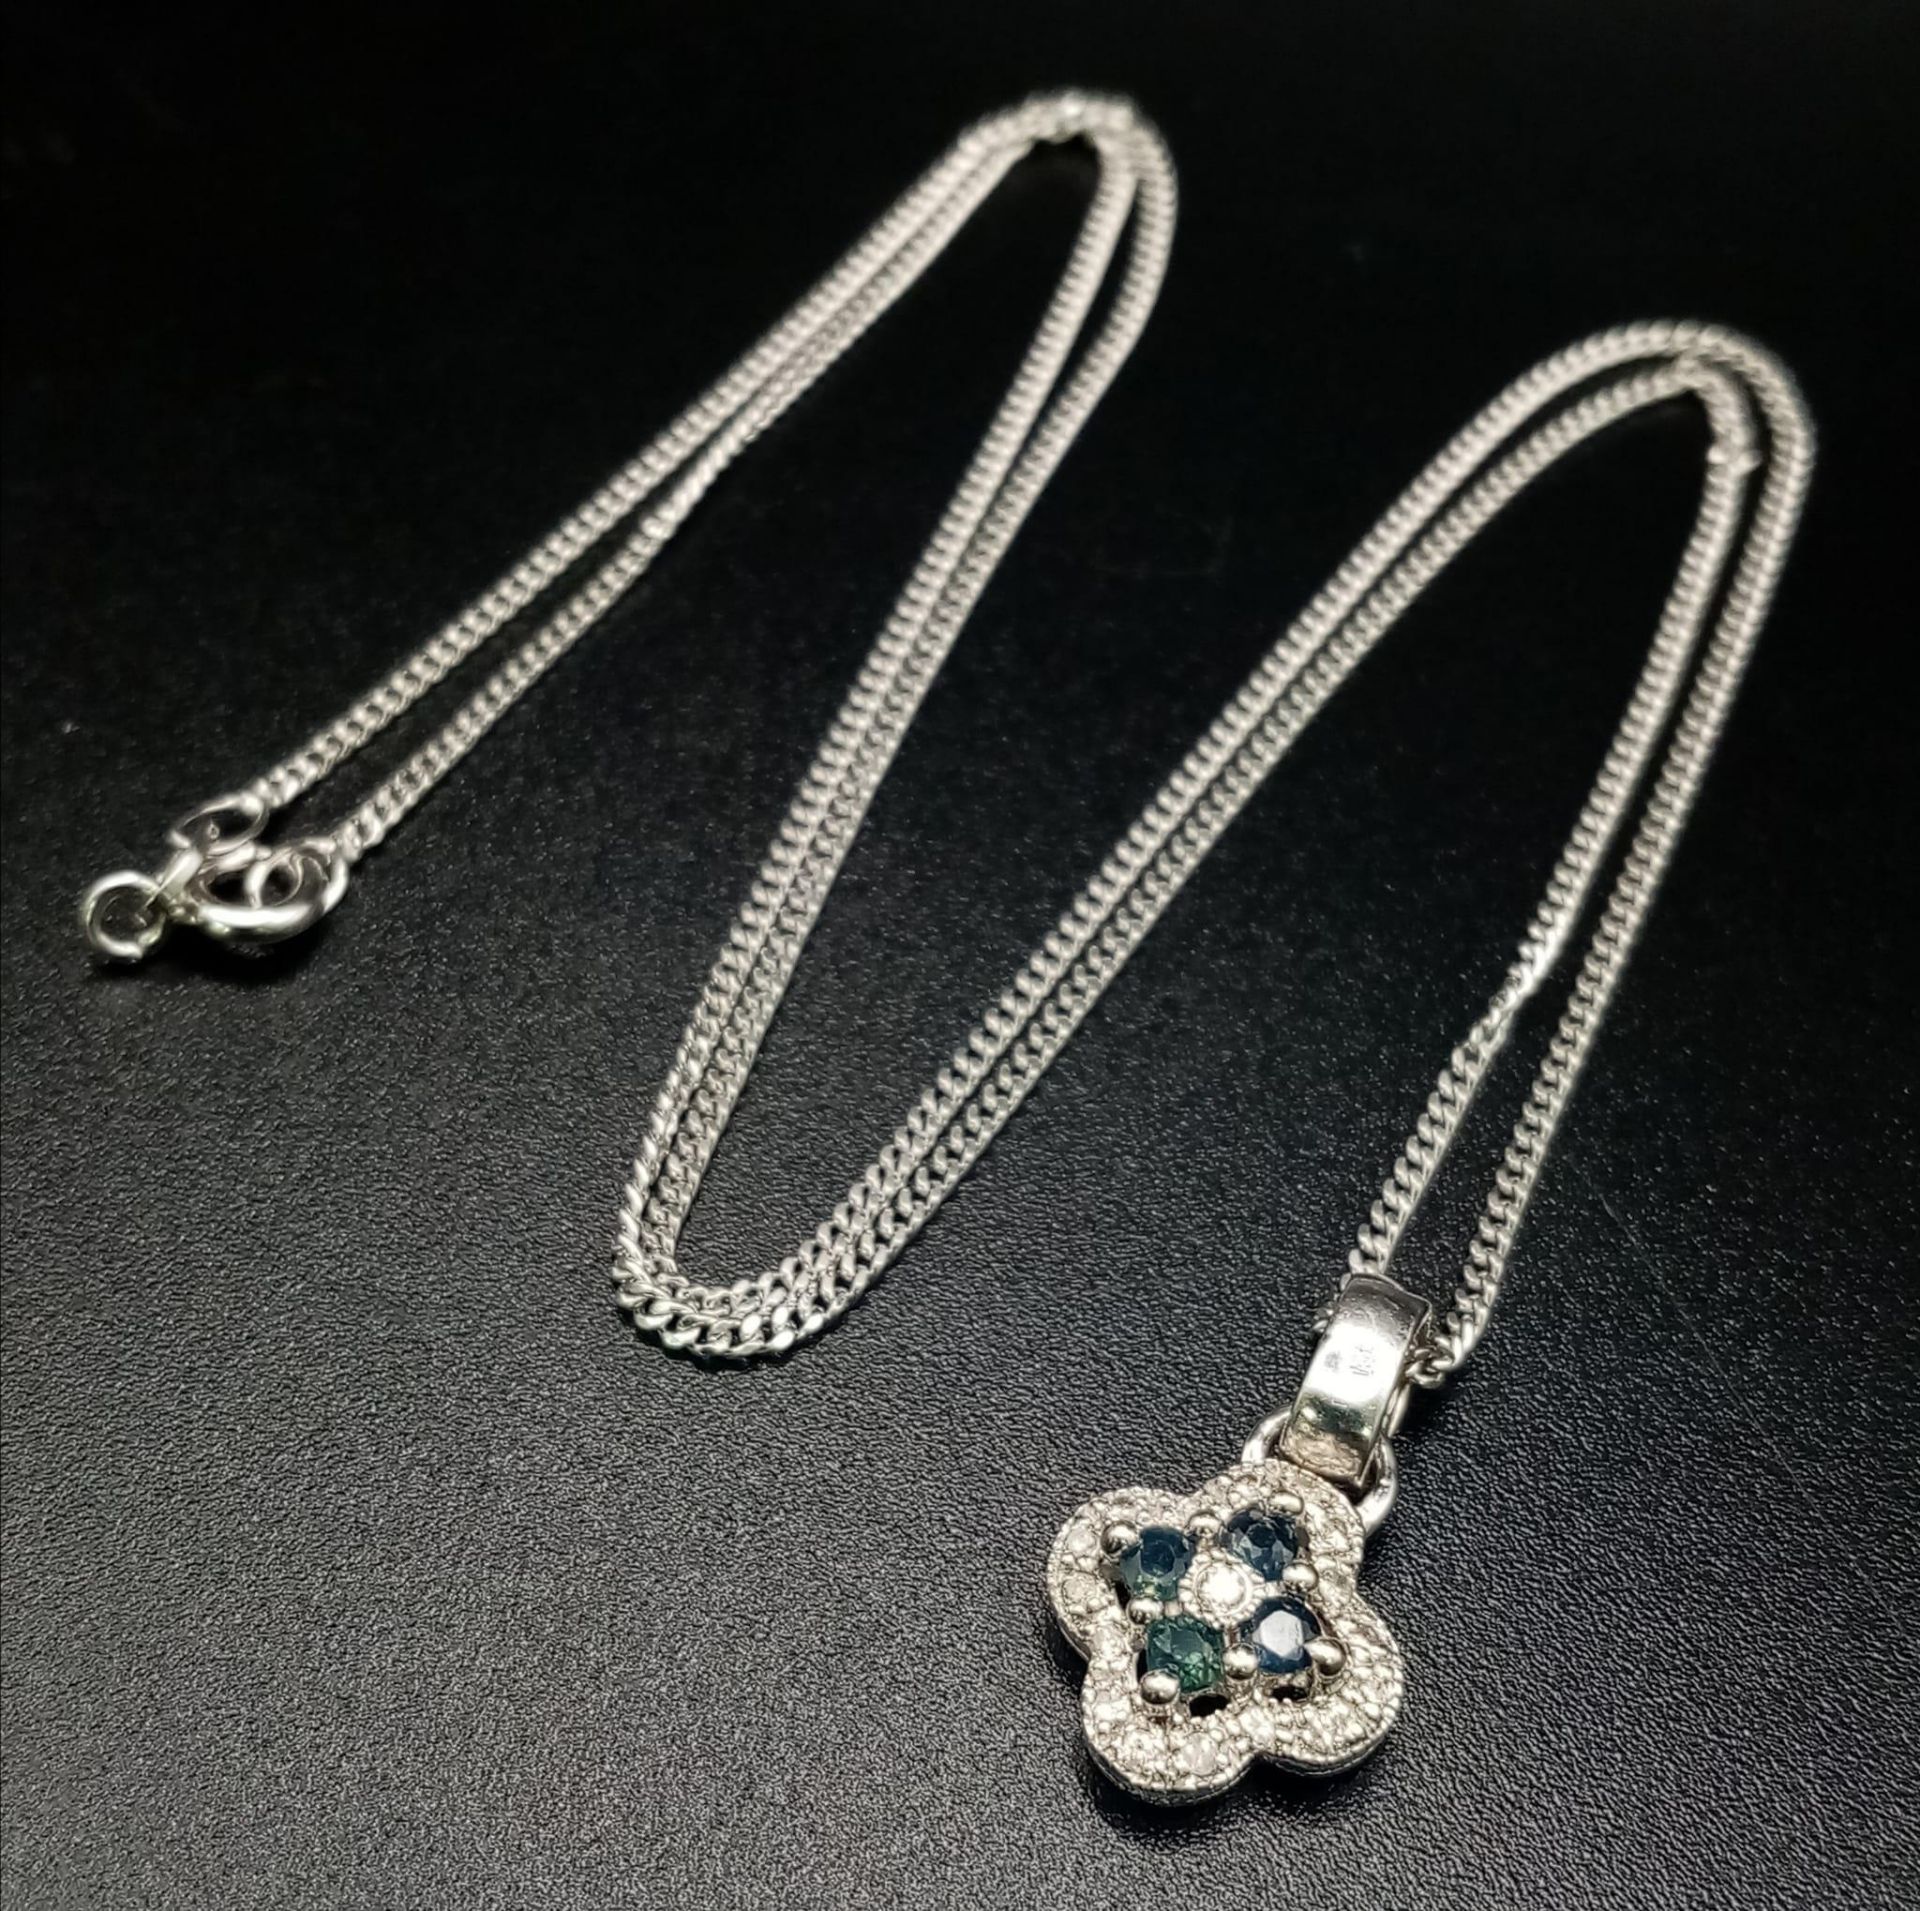 A 14K White Gold Sapphire and Diamond Pendant on a 9K White gold necklace. 15mm - pendant. 50cm